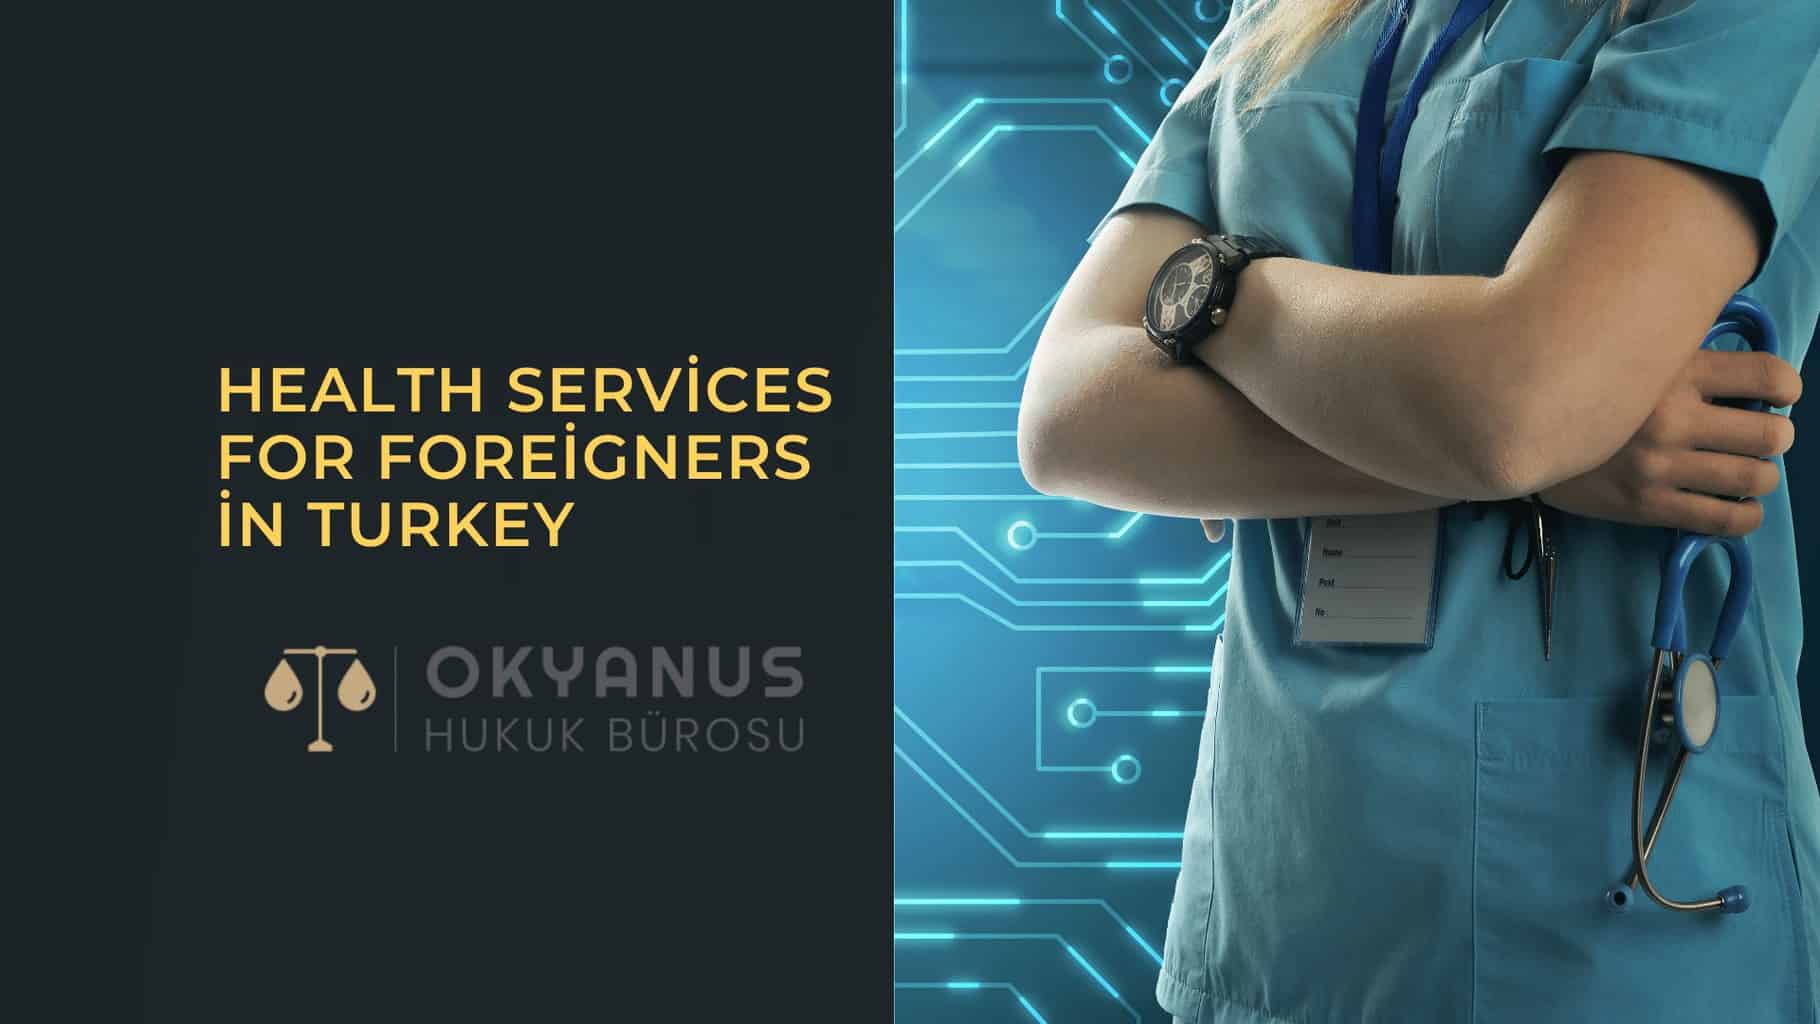 Health Services for Foreigners in Turkey